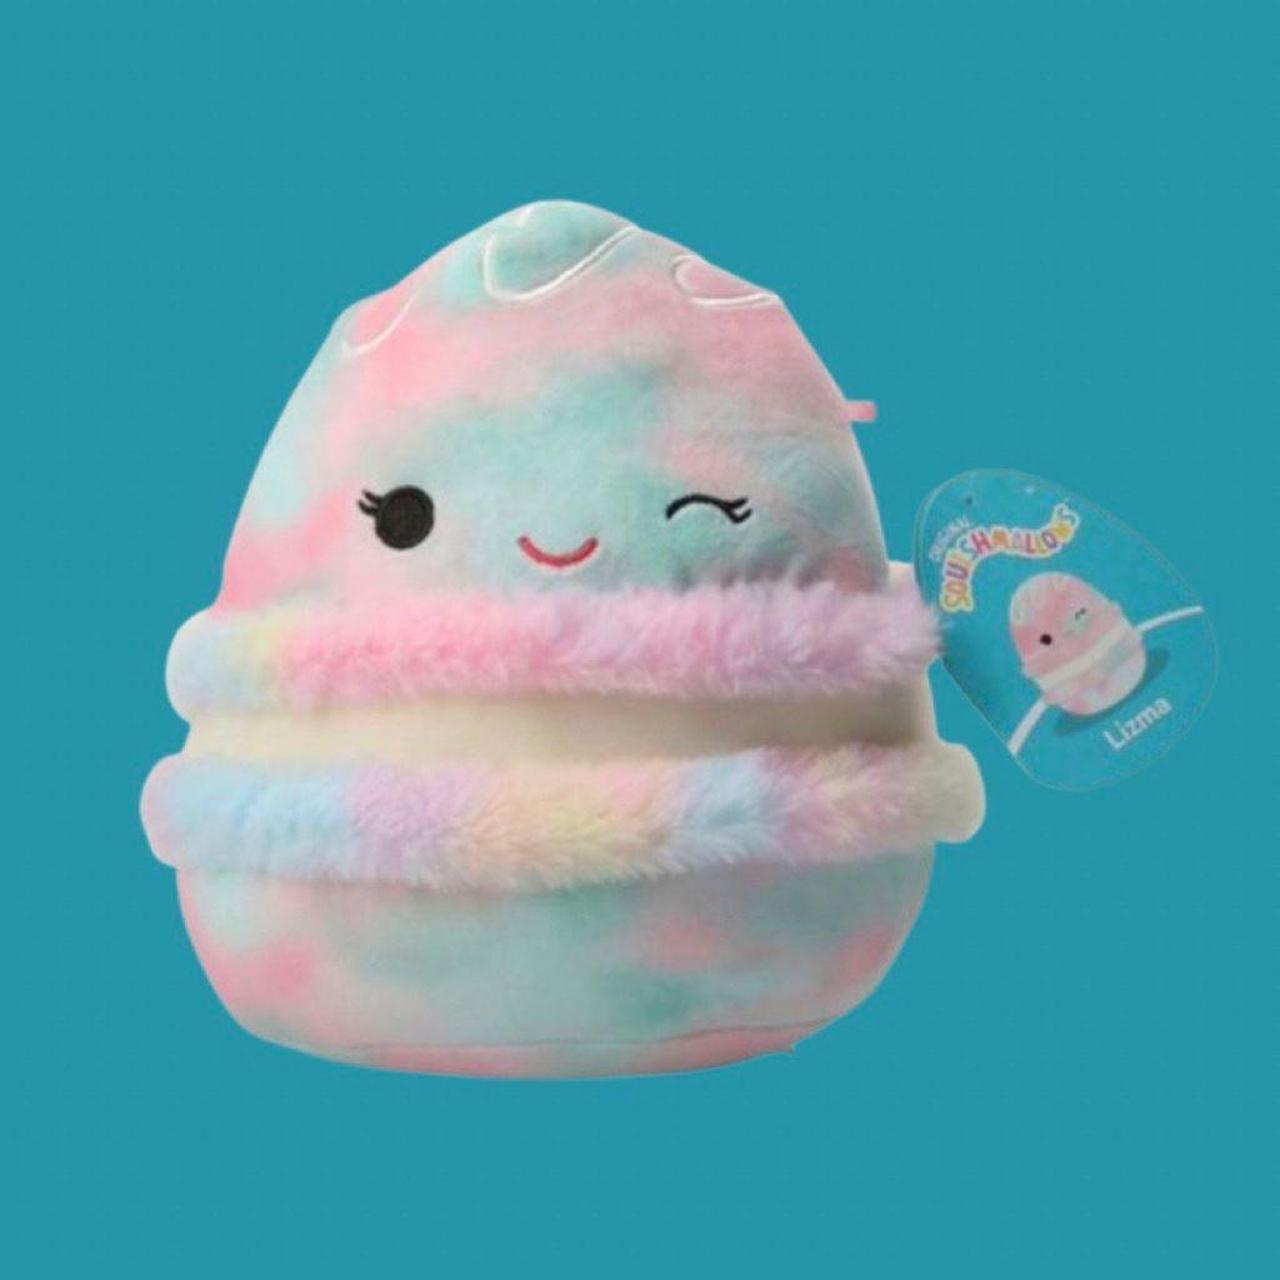 NWT squishmallows lizma the macaron 7.5in, Great